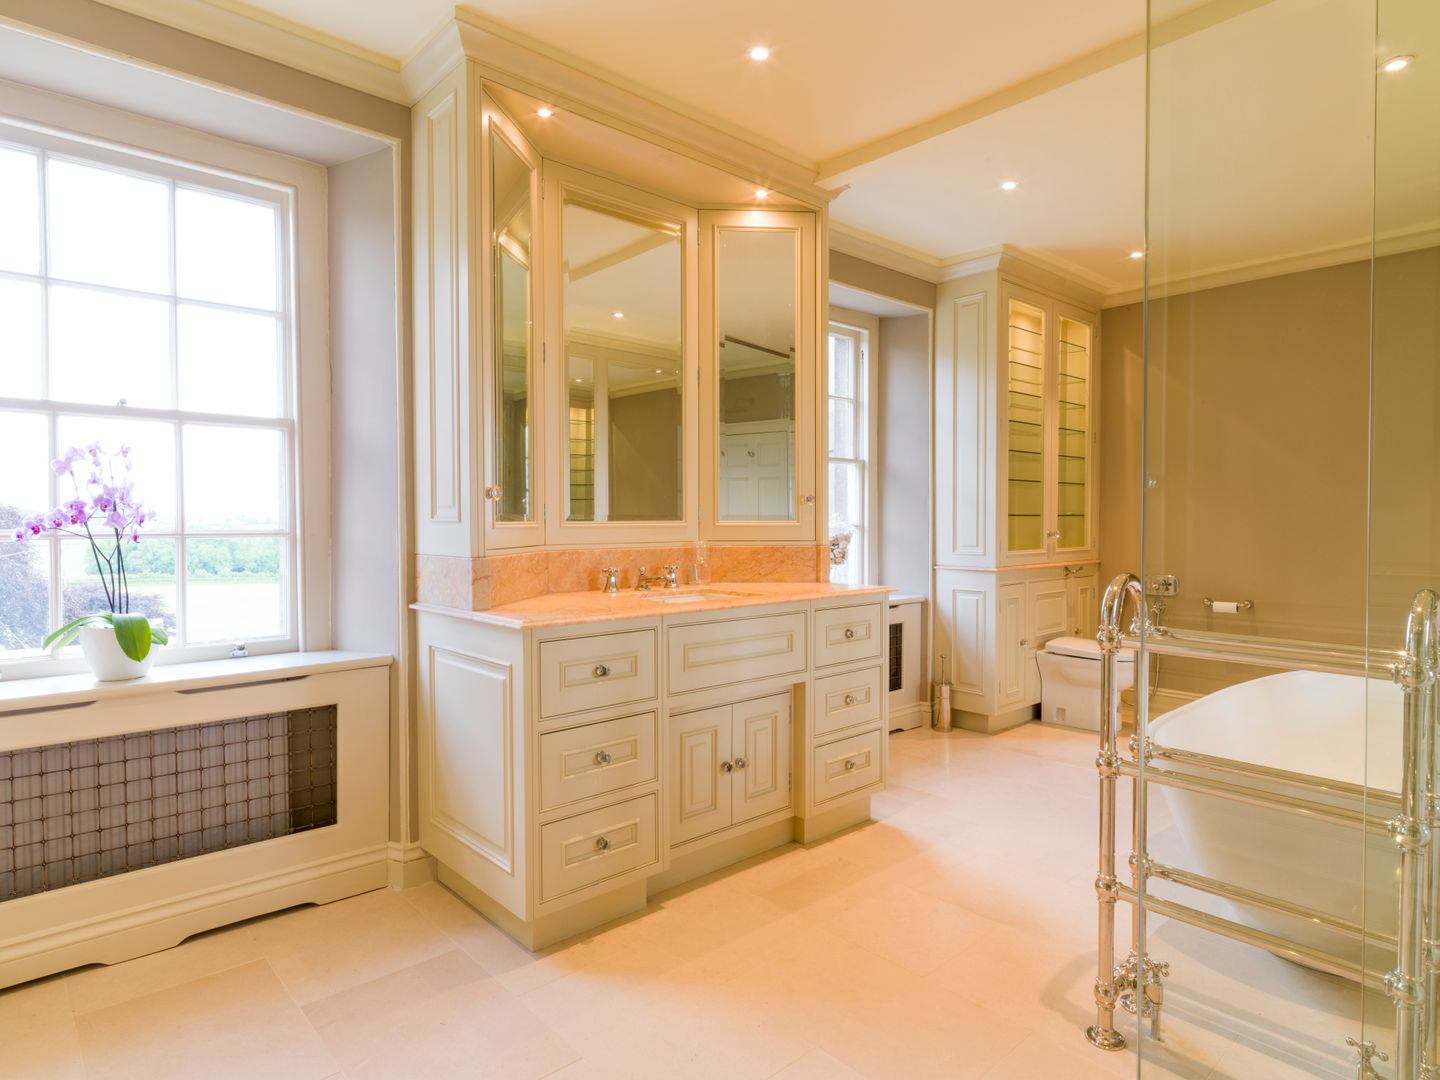 Bath Bathroom designed and made by Tim Wood Tim Wood Limited Bagno in stile classico